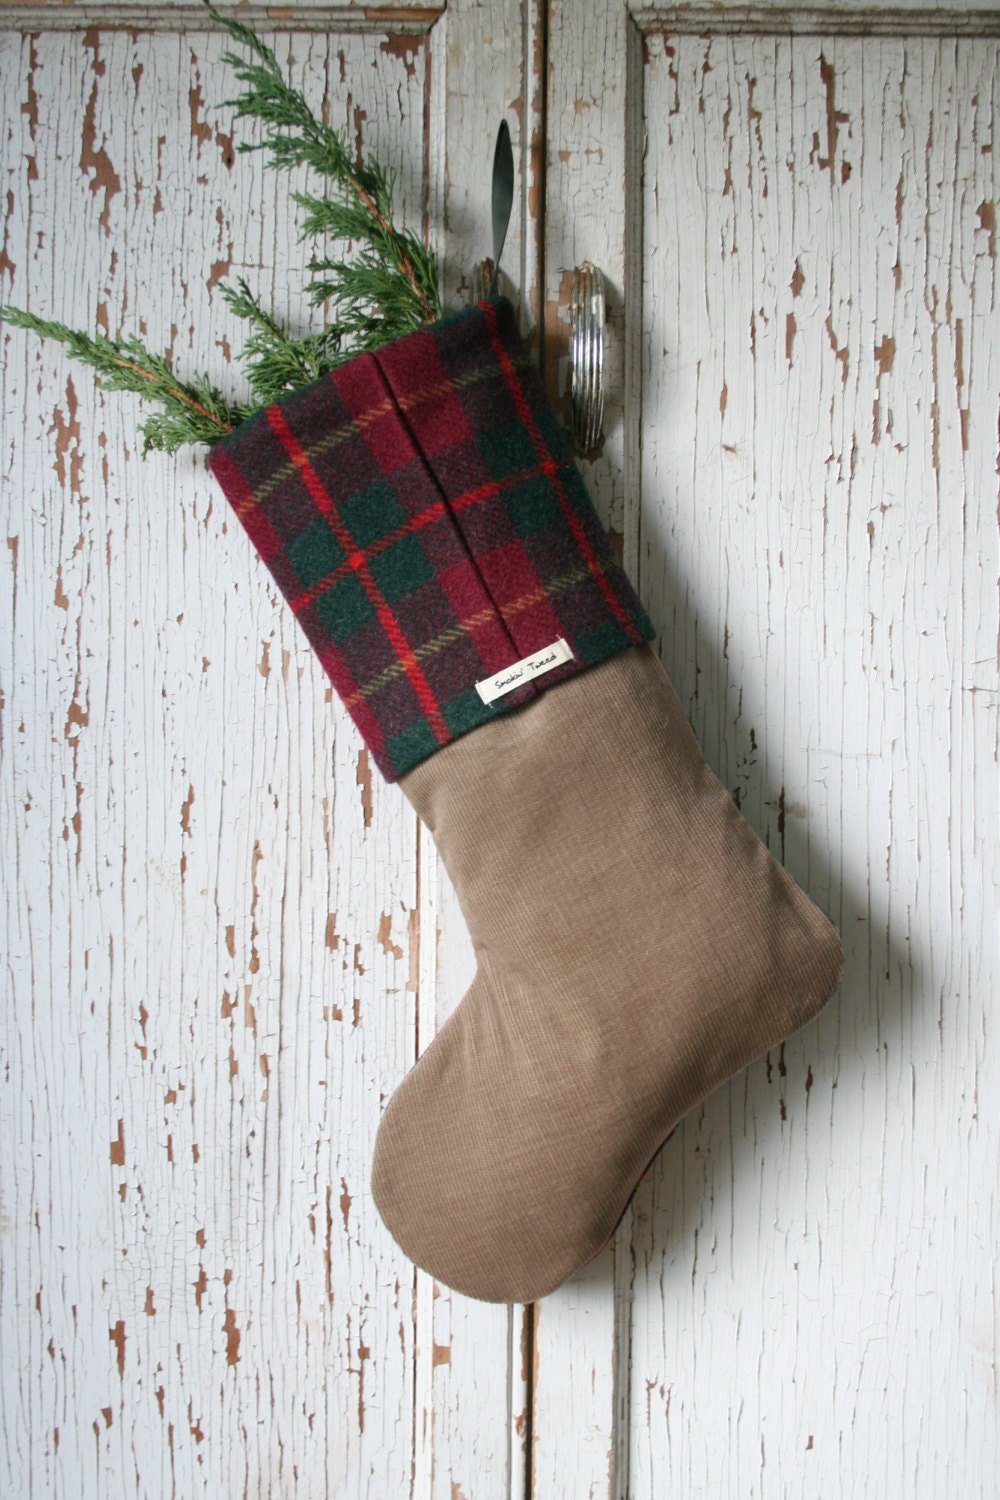 Unique Wool Tweed CHRISTMAS STOCKING w/ Mother Of Pearl BUCKLE - No. 3